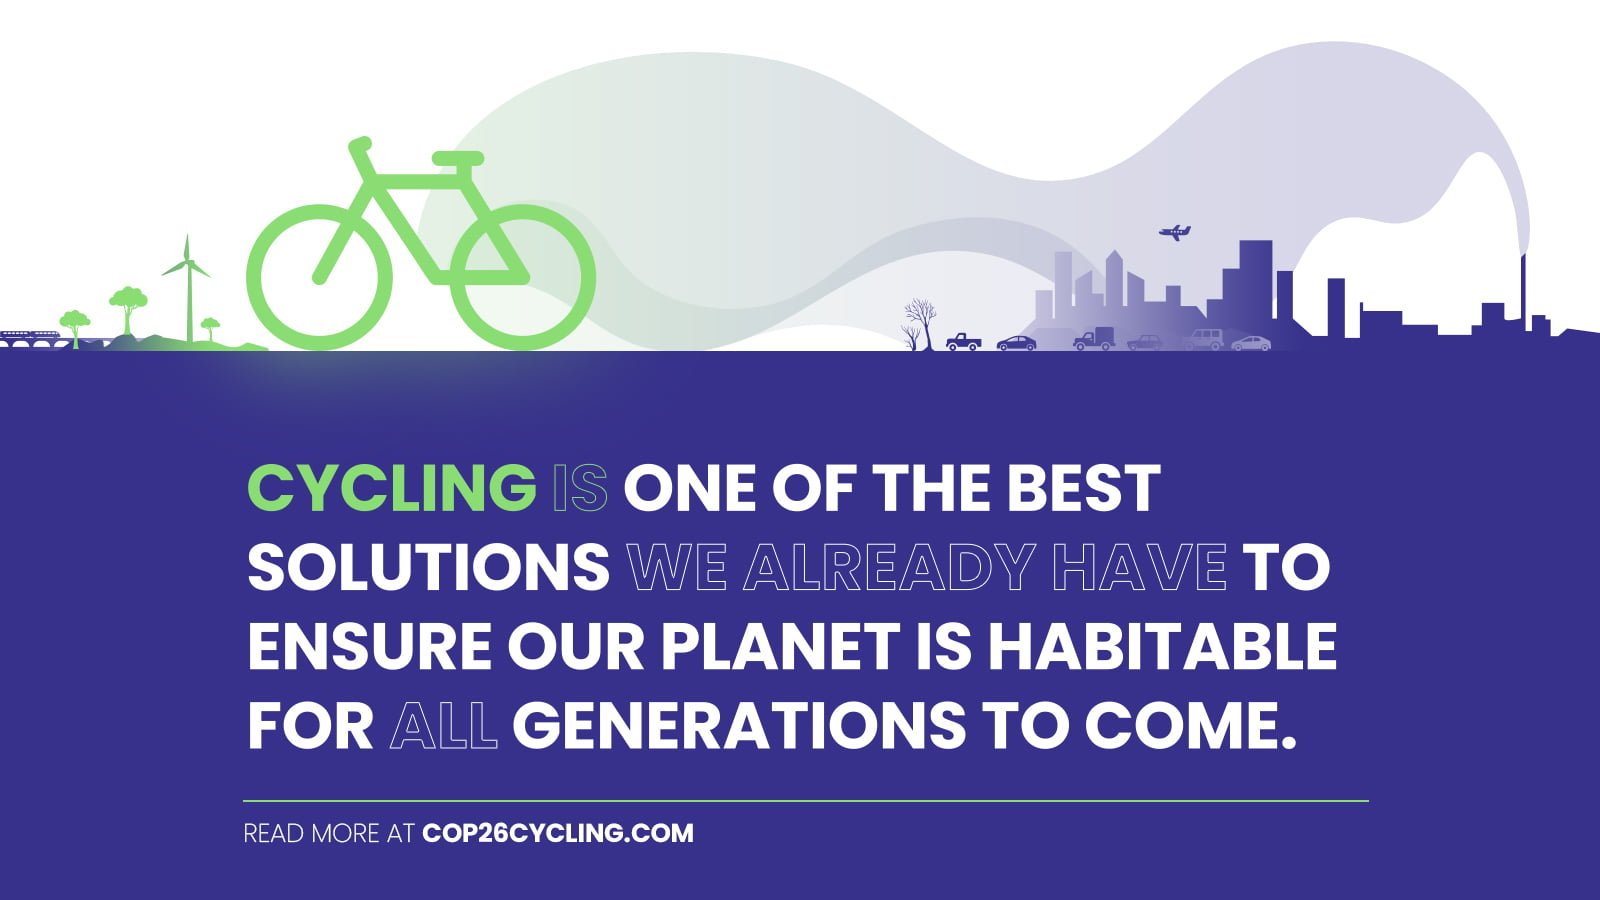 Open letter: Global coalition calls on governments at COP26 to boost cycling levels to reduce carbon emissions and reach climate goals quickly and effectively